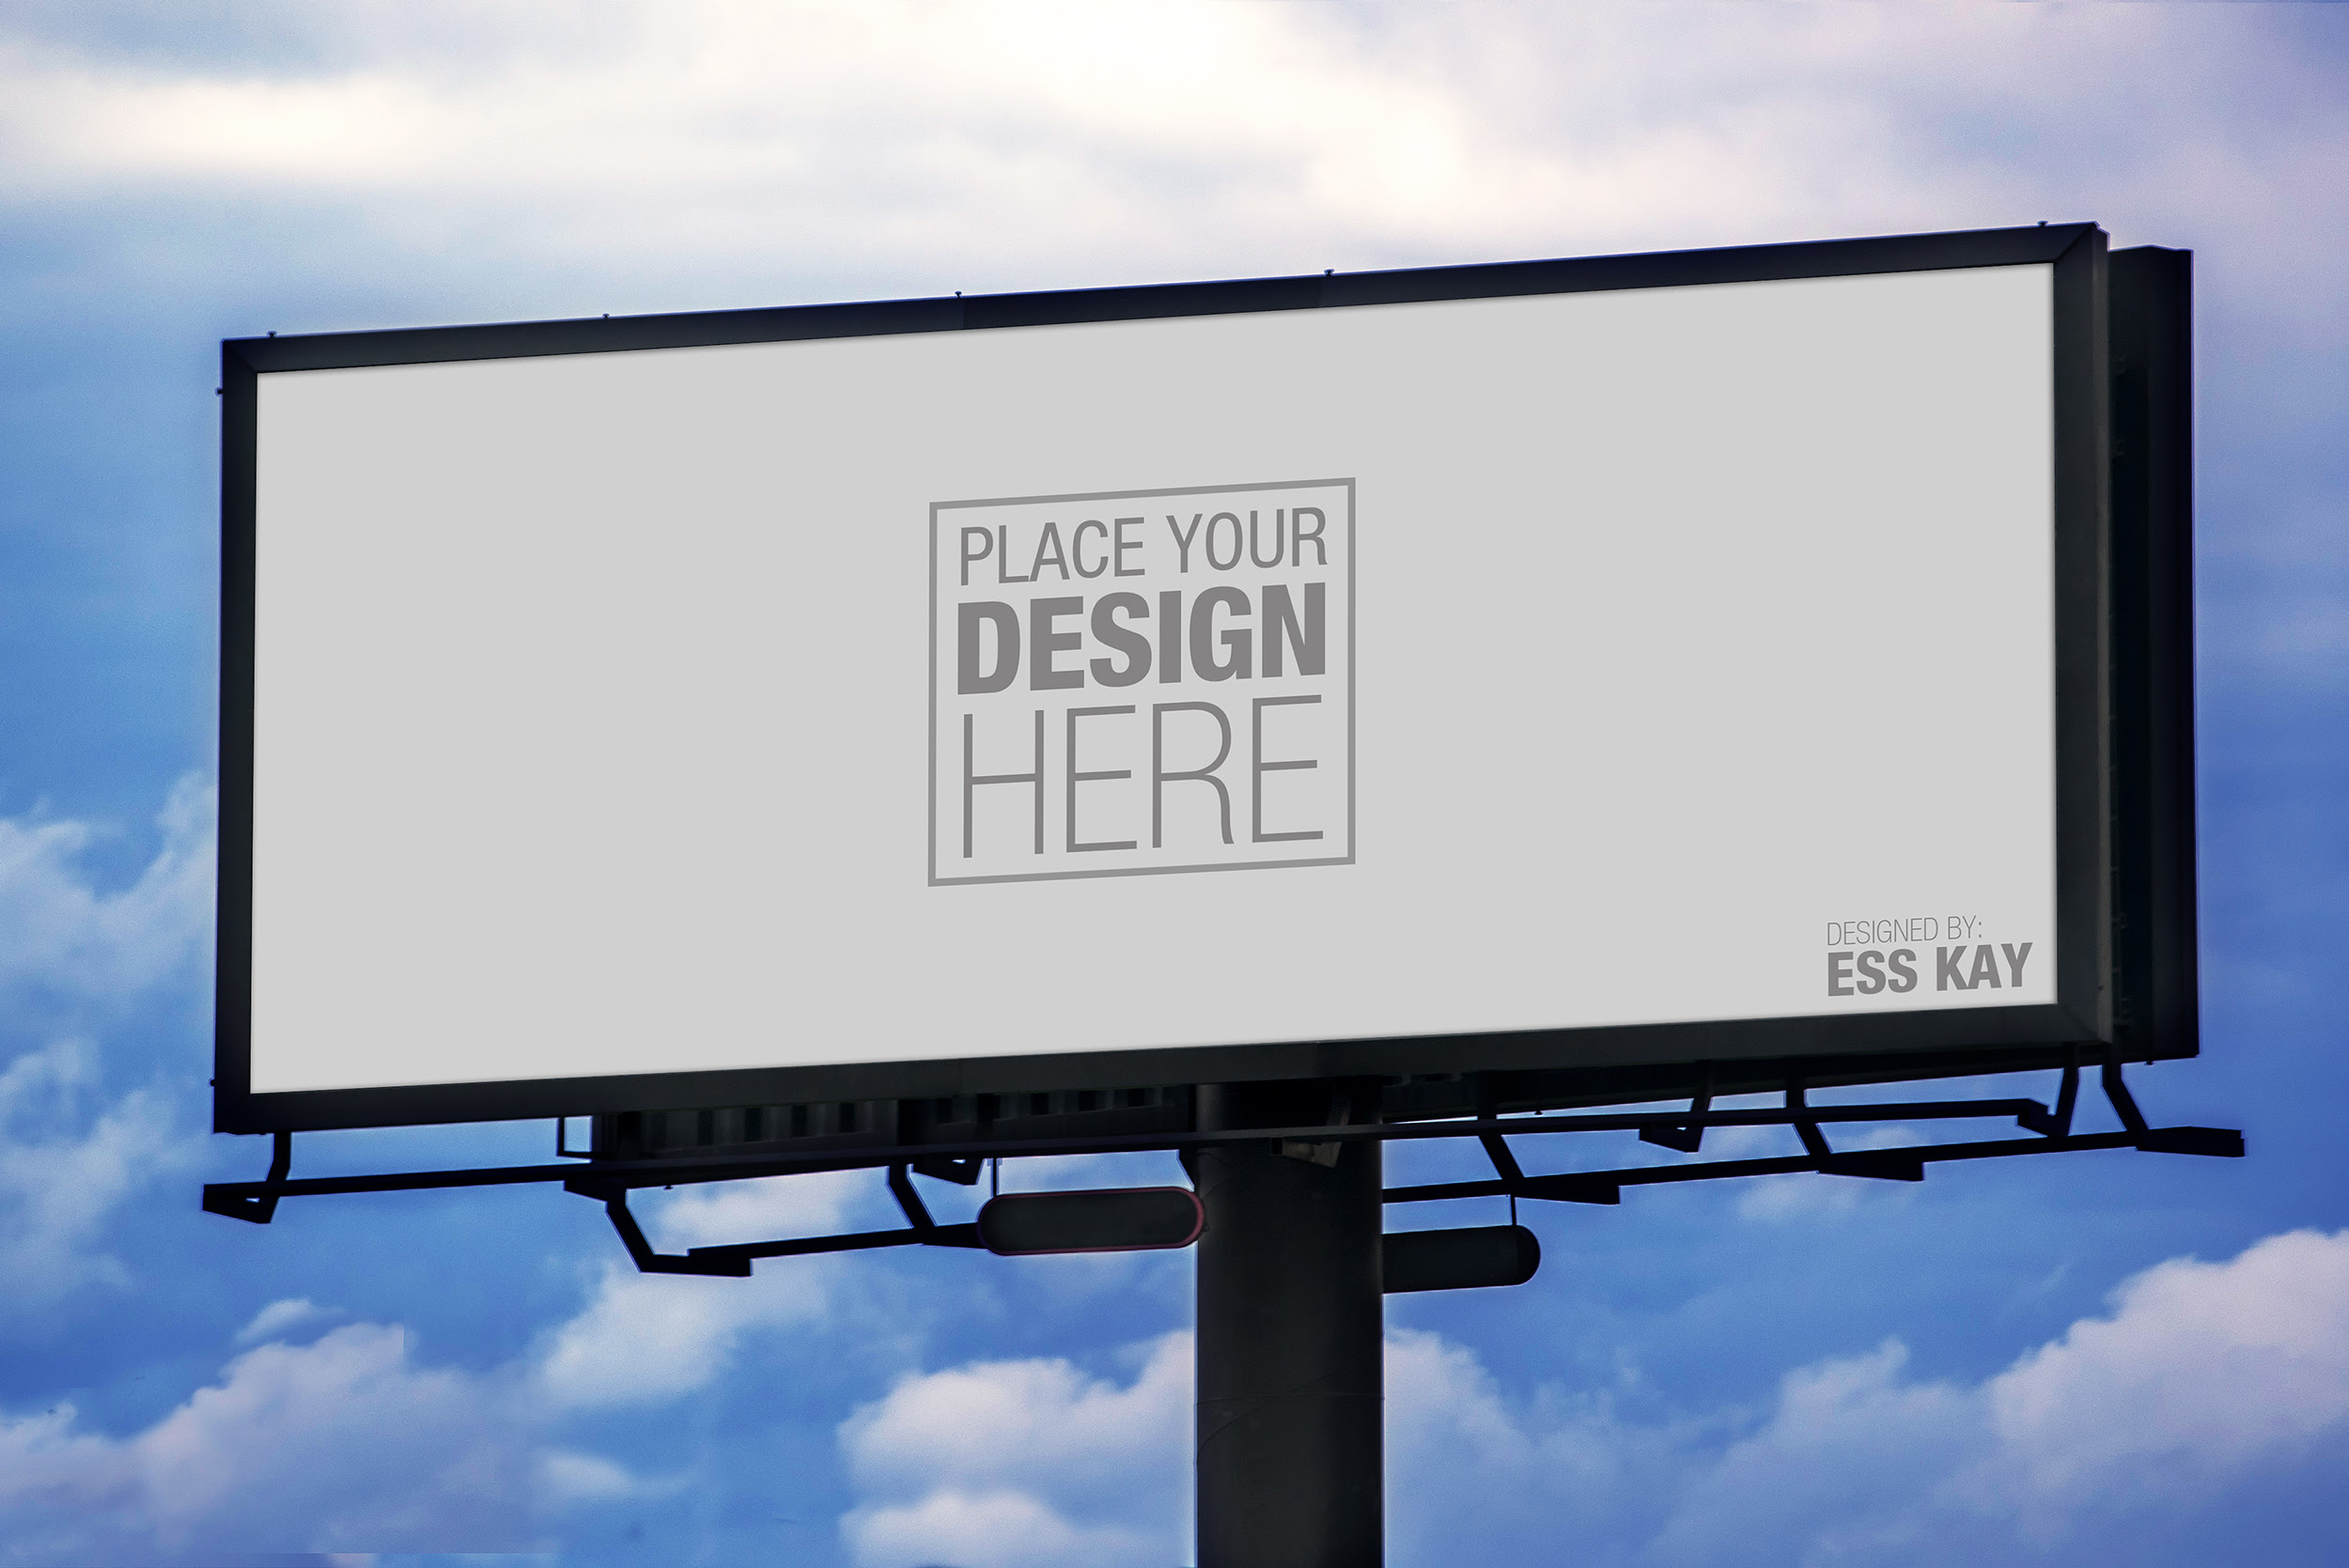 10 Outdoor Billboard Mockup Psd Free Images Outdoor Free Psd Poster Mockup Templates Outdoor Free Psd Poster Mockup Templates And Billboard Mockup Psd Free Newdesignfile Com